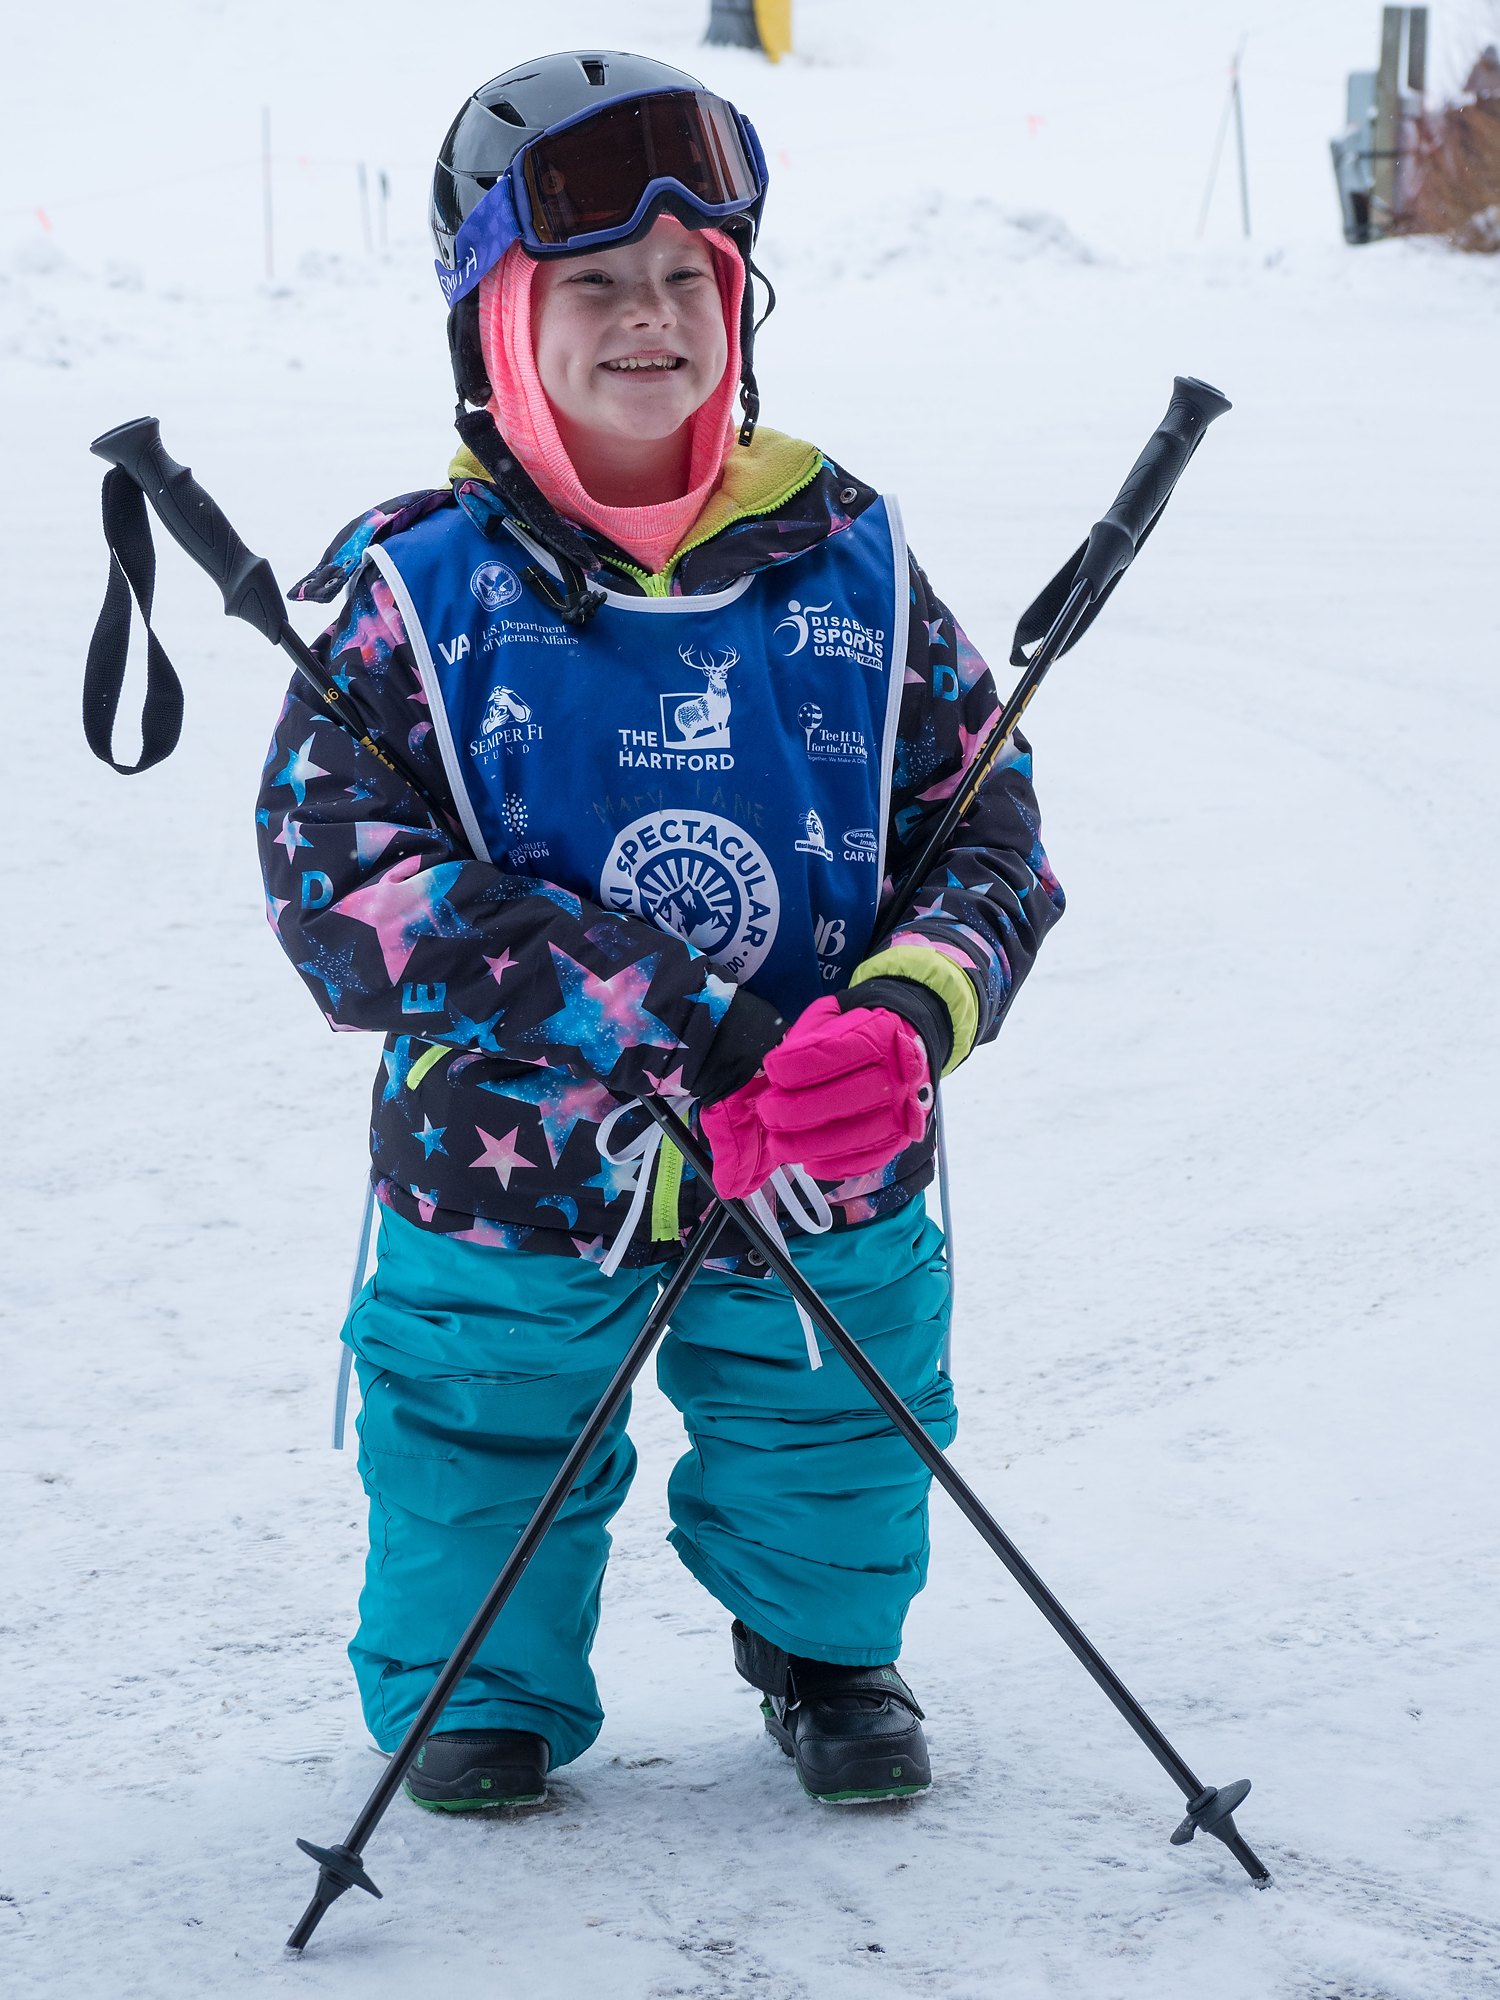 PHOTO: Lily Biagini, 10, a double amputee, learned to snowboard in Breckenridge, Colo.
